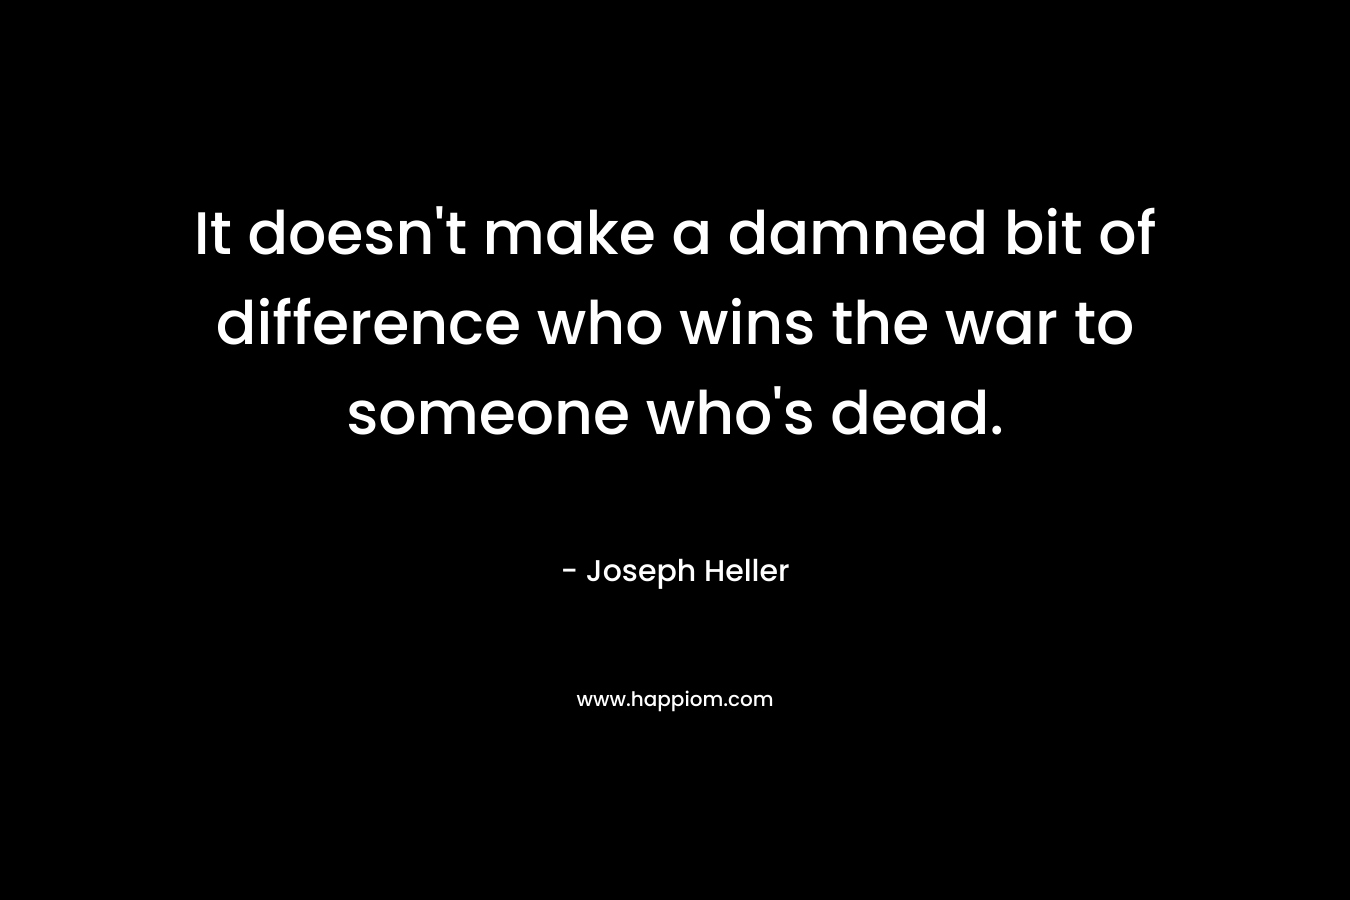 It doesn't make a damned bit of difference who wins the war to someone who's dead.